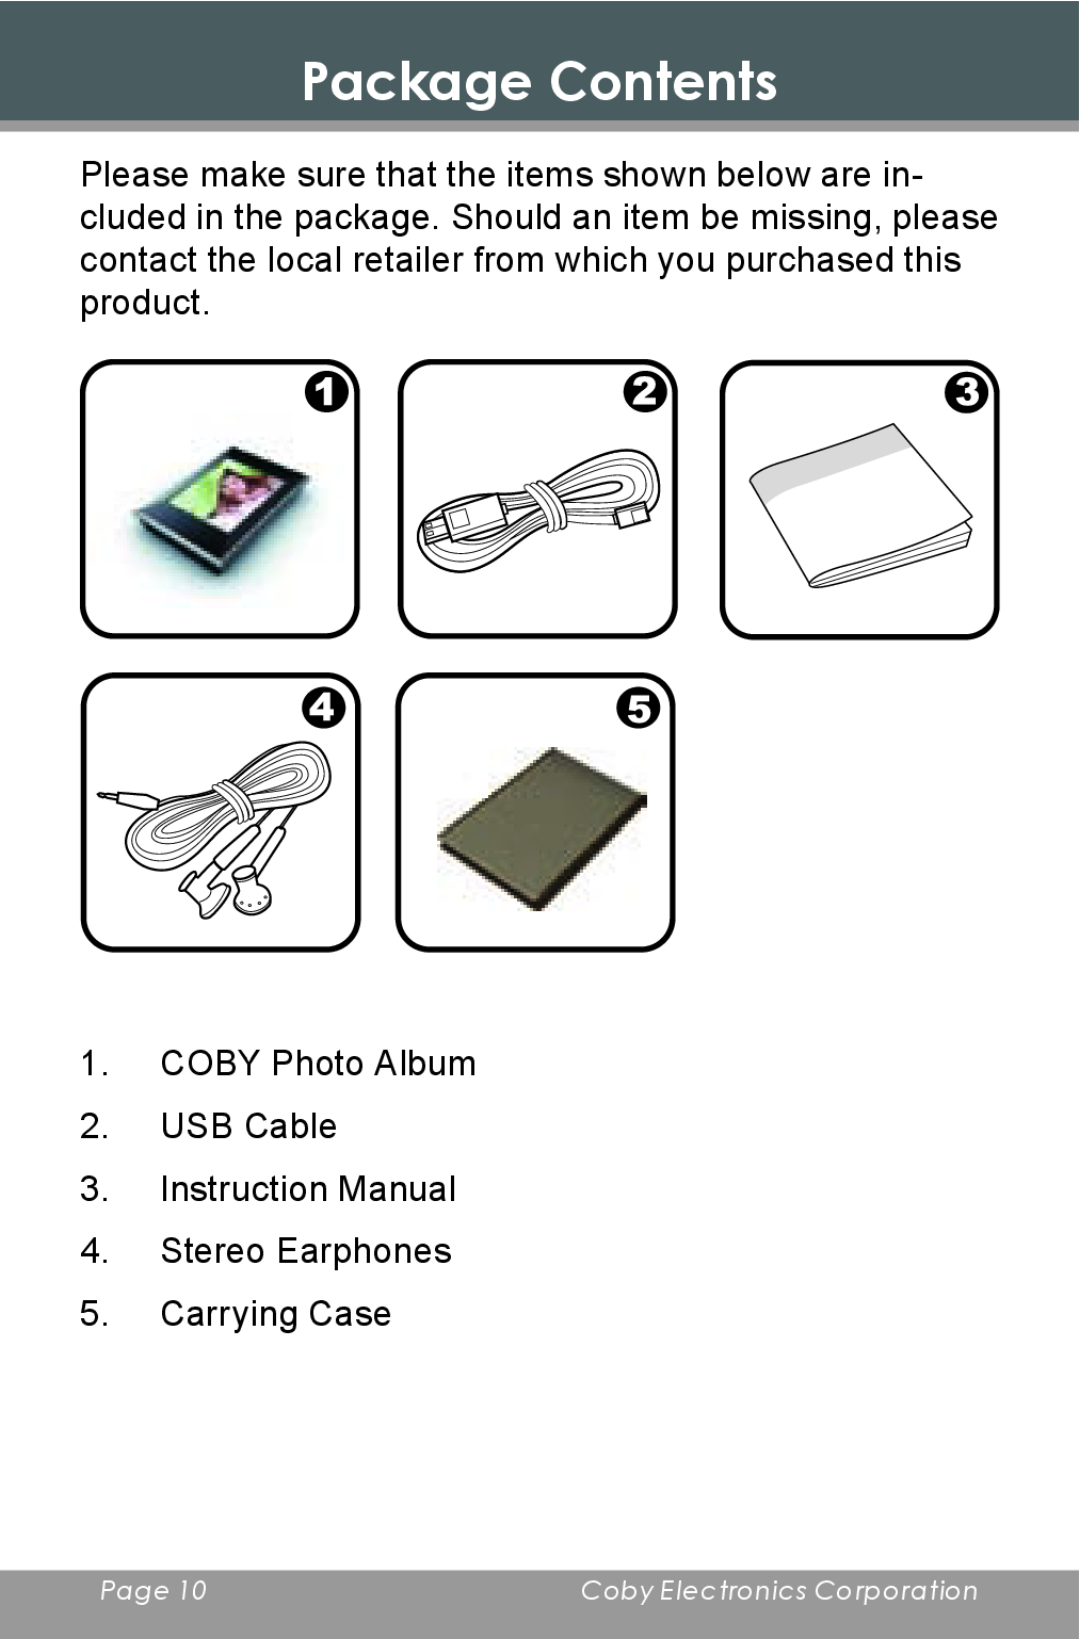 COBY electronic DP-240 instruction manual Package Contents, COBY Photo Album 2. USB Cable 3. Instruction Manual, Page 